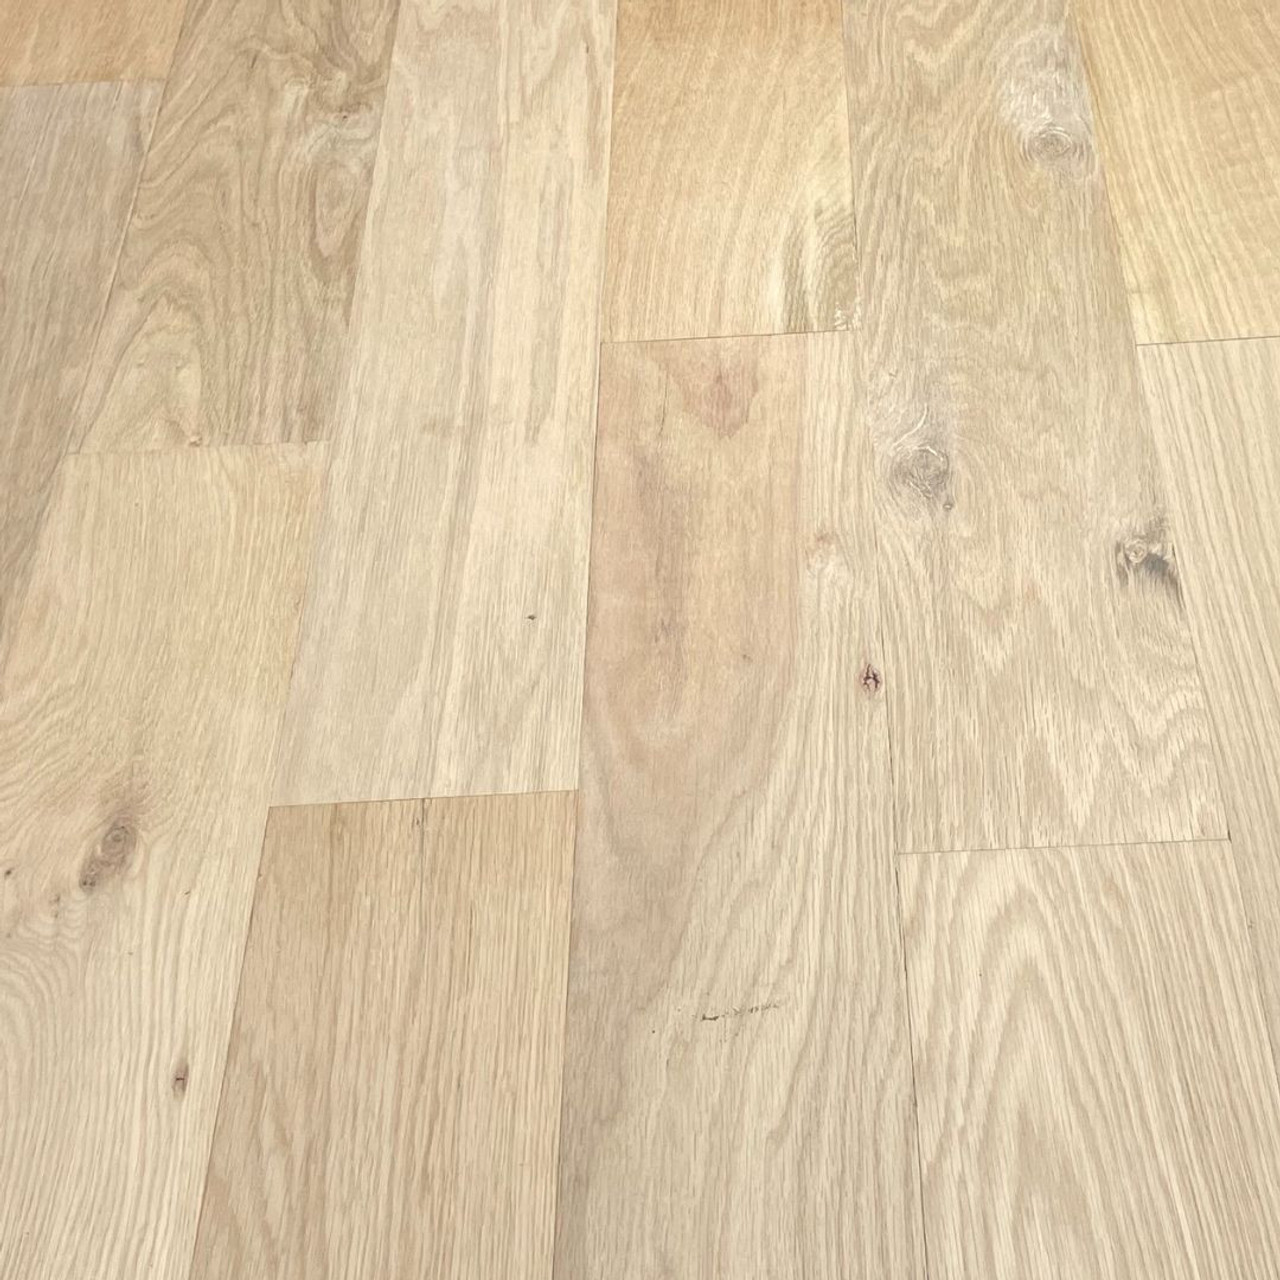 Hapwood White Oak 3/8" 3-ply Mill Crafted Hardwood Flooring (Not Eligible For Free Shipping)